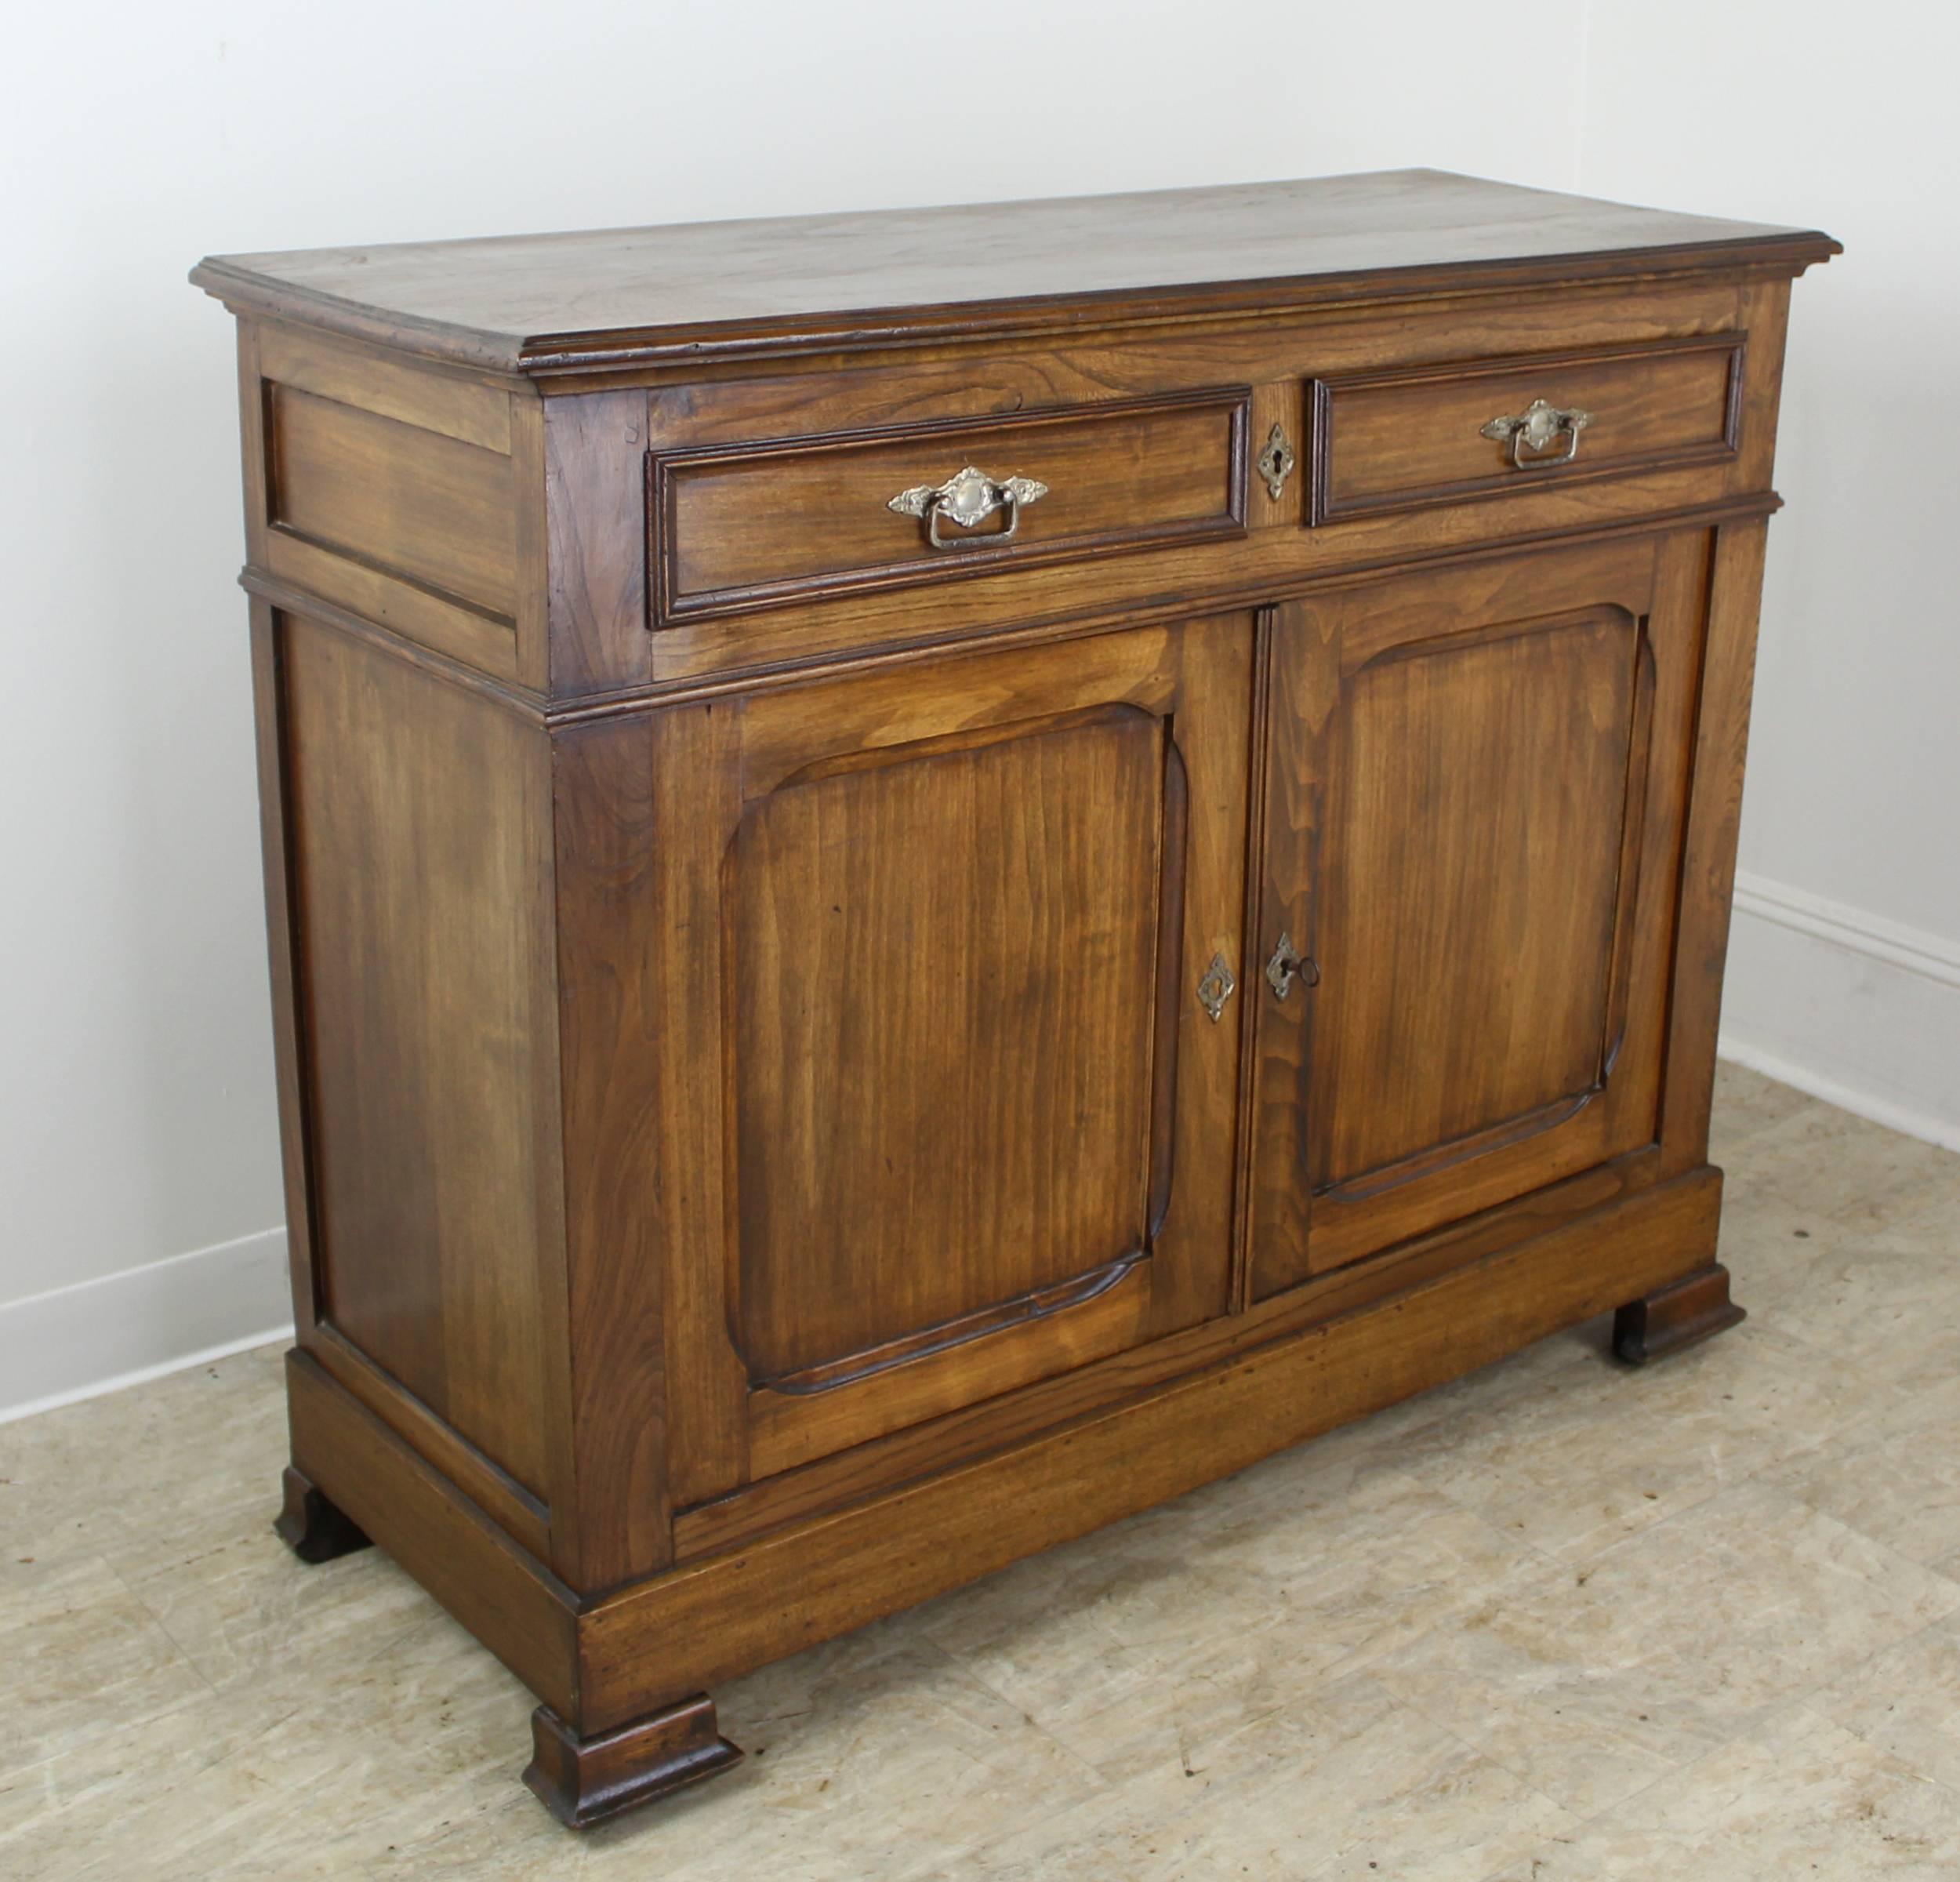 A classic two-door buffet in dramatically grained elm. The eye catching design details include interesting molding at the top, carved inset panels on the doors and sides, and classically shaped feet. The single interior drawer is non-adjustable.